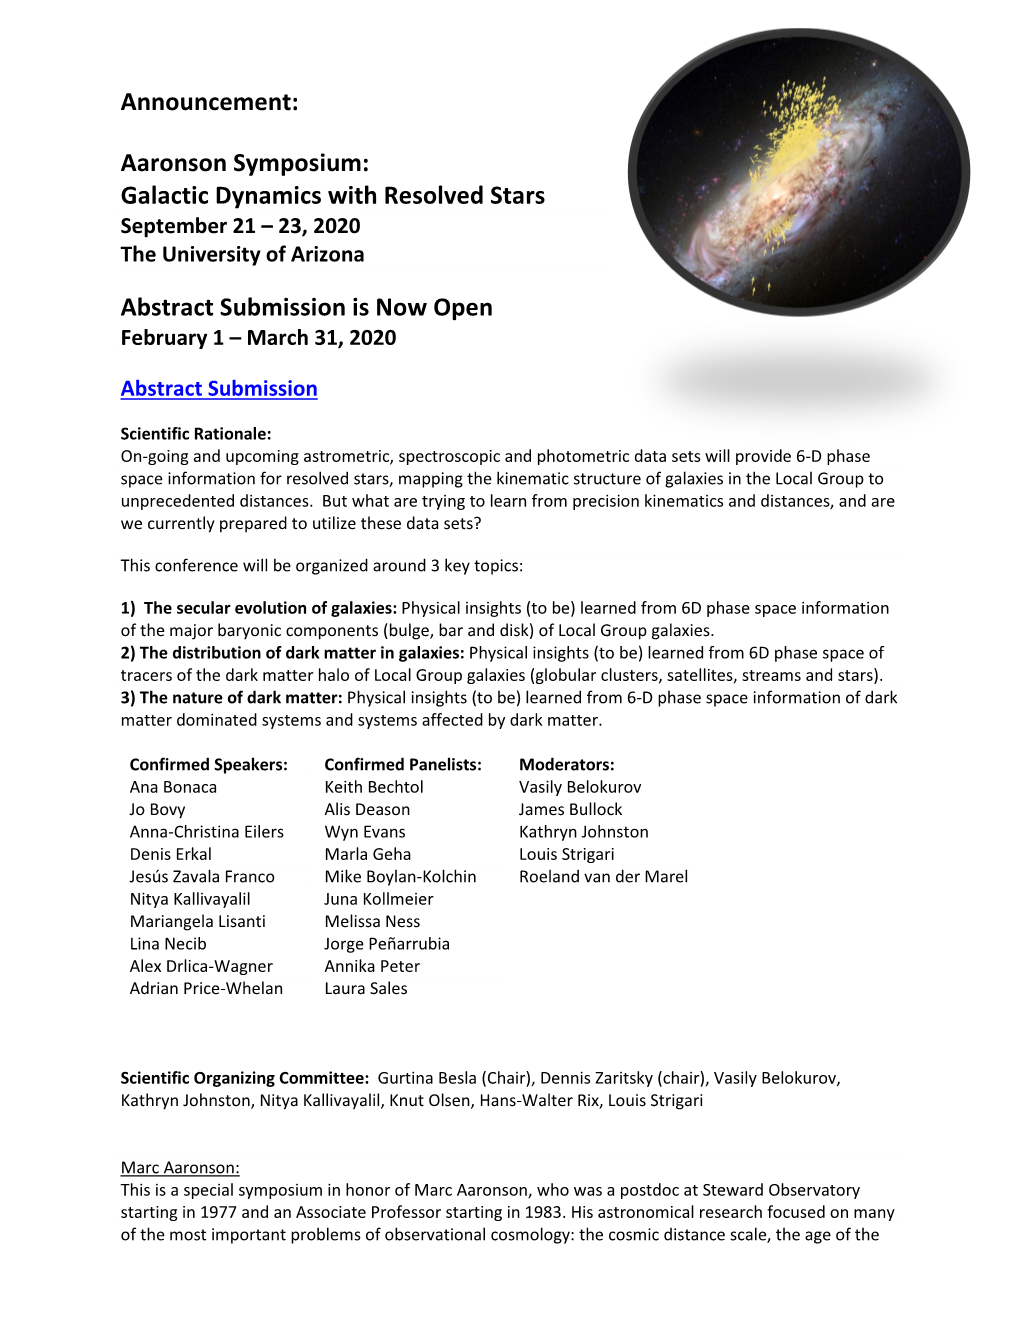 Announcement: Aaronson Symposium: Galactic Dynamics with Resolved